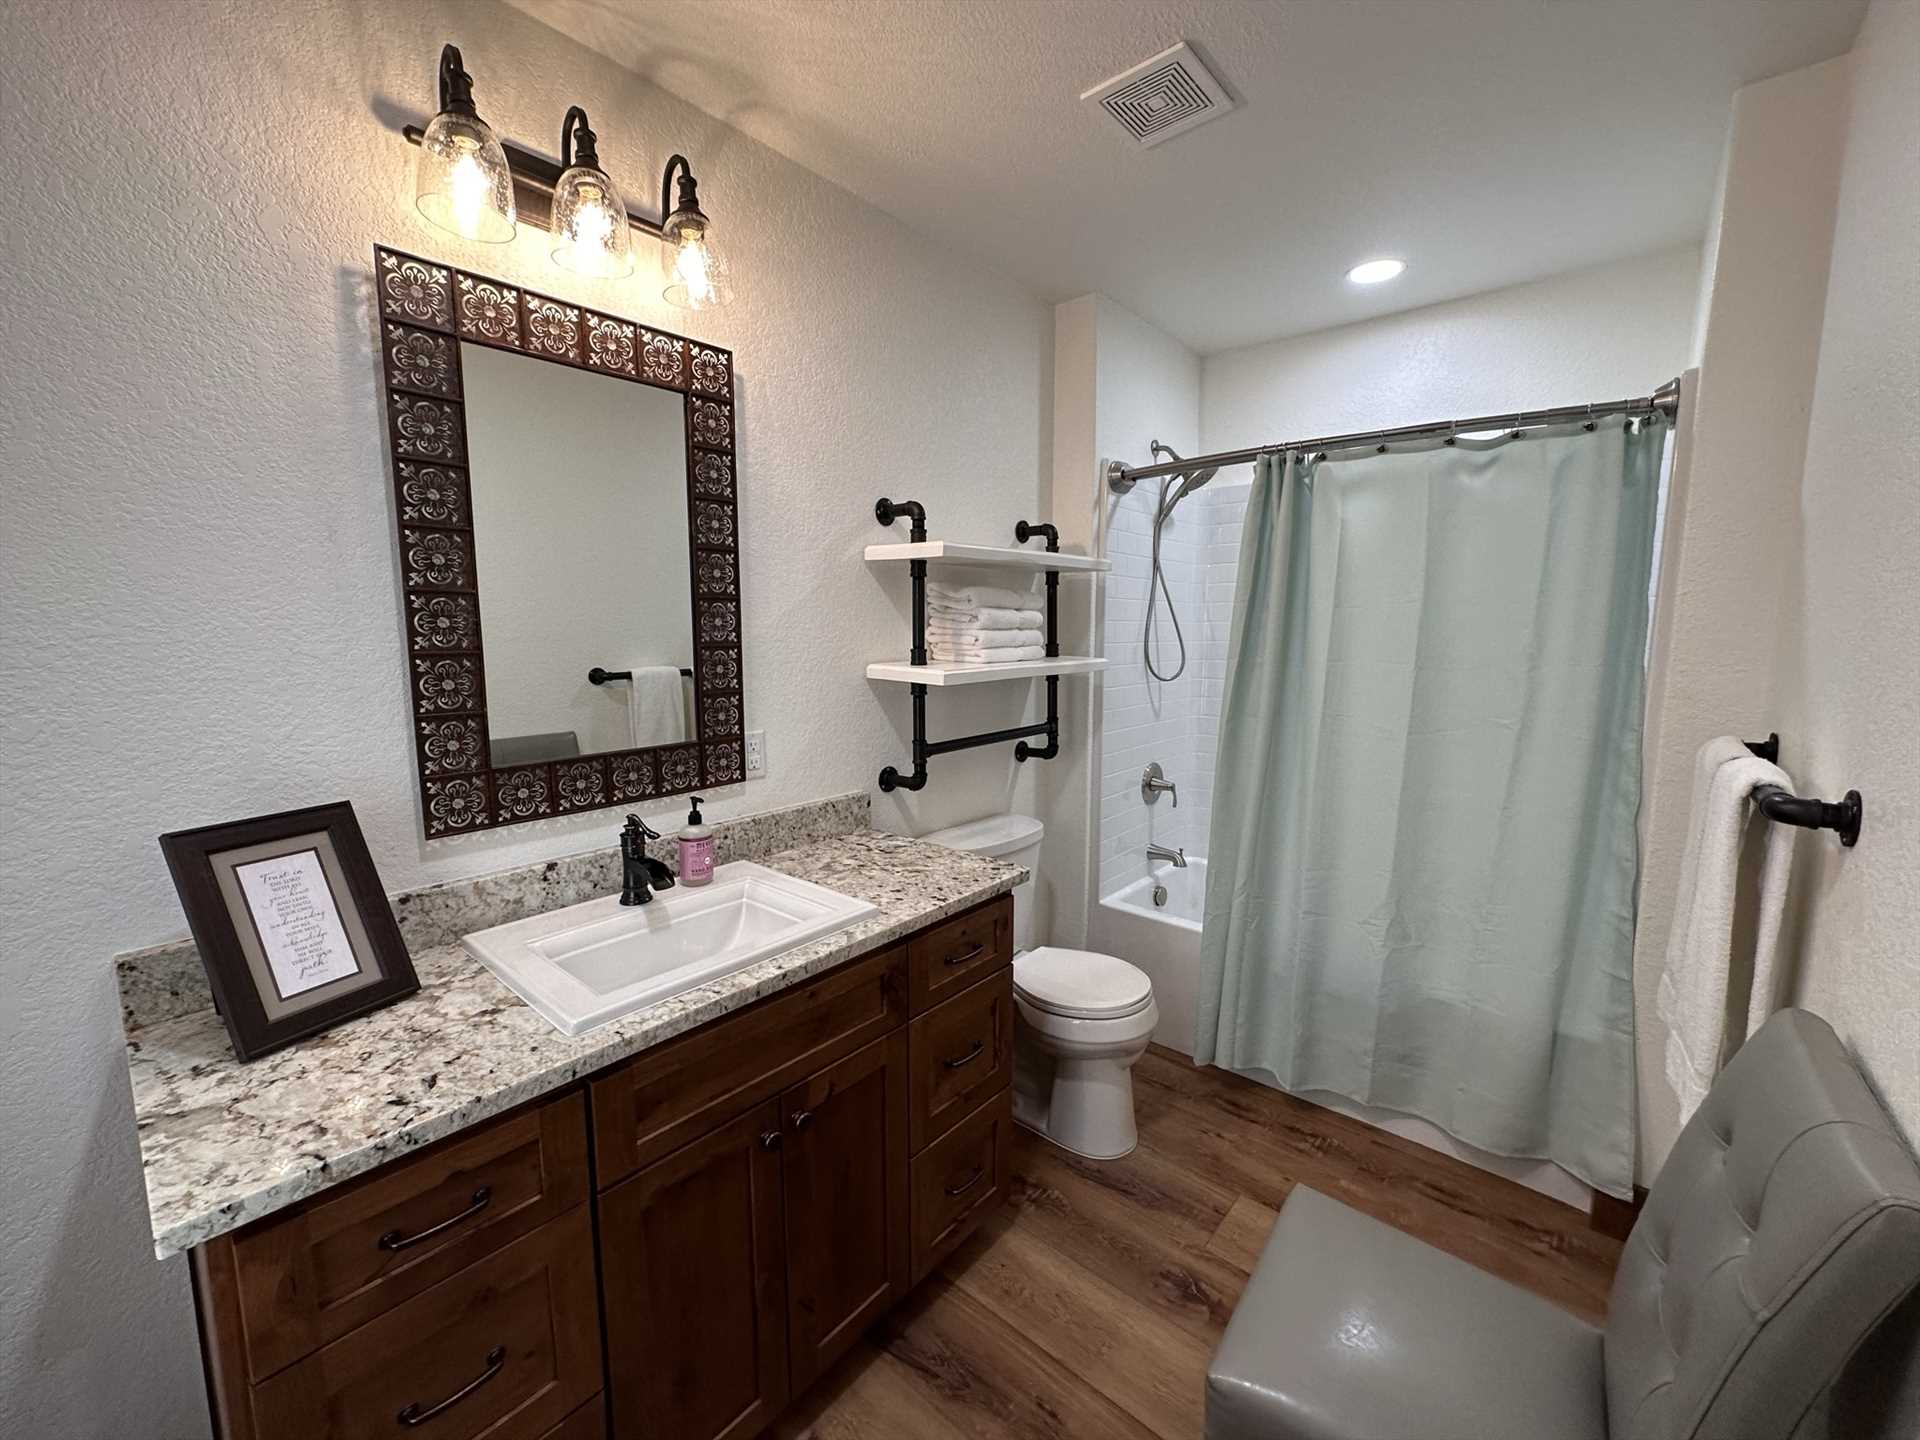                                                 The five full bedroom-adjoining baths, as well as the half-bath downstairs, all come with fresh linens. We only ask you bring your own towels for outdoor water use.